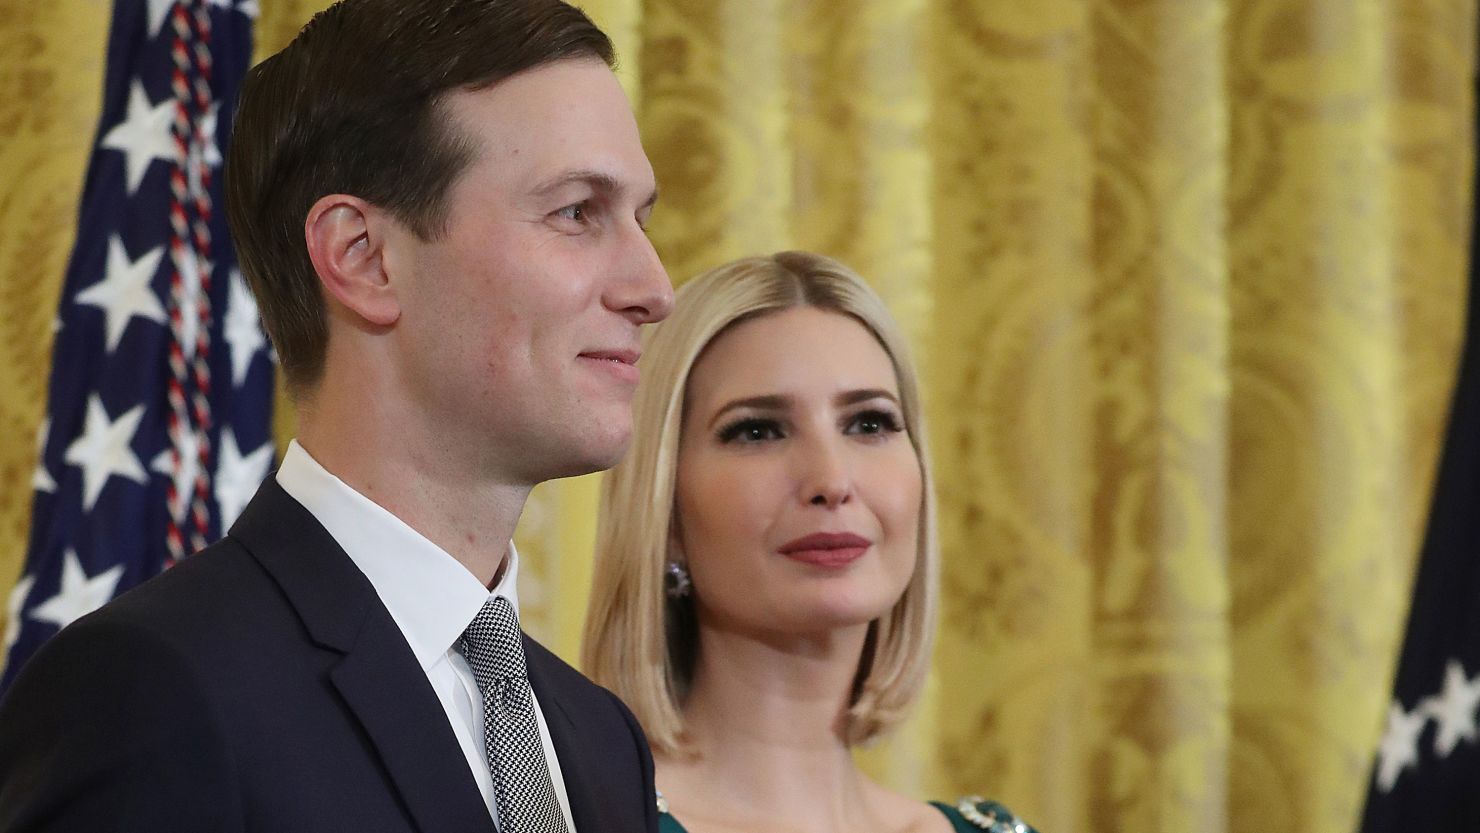 White House senior advisers Jared Kushner and Ivanka Trump stand with their children during a Hanukkah reception in the East Room of the White House on December 11, 2019.